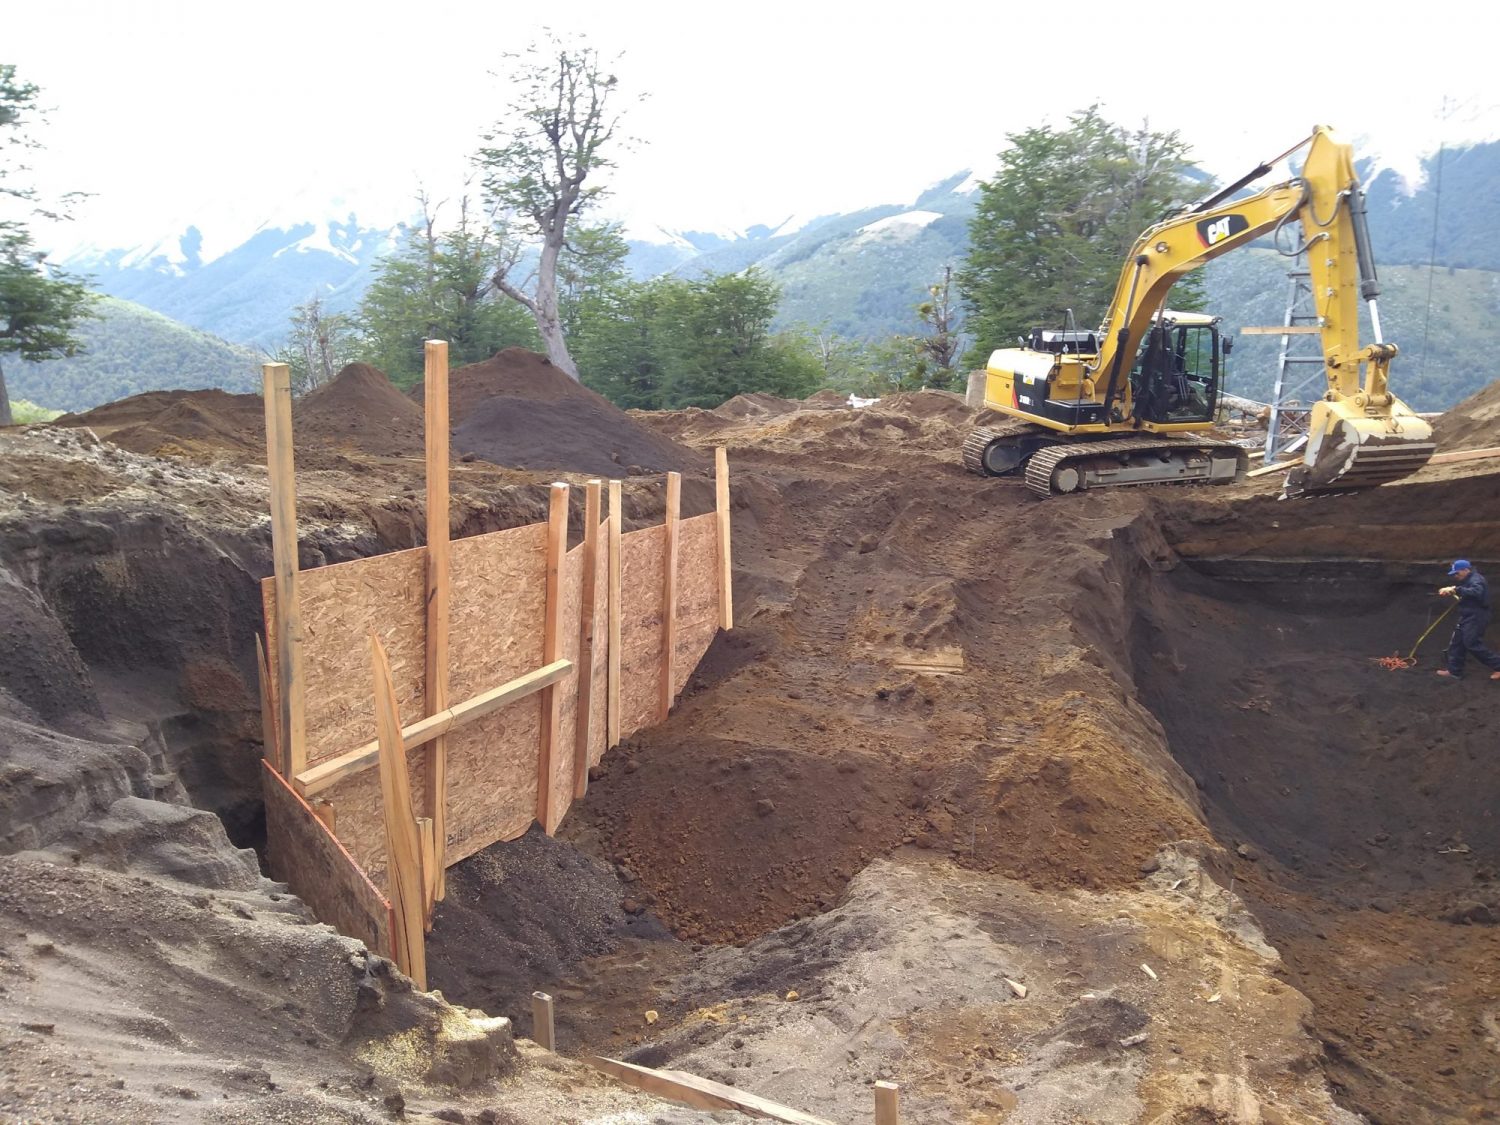 Excavating the ground to place the new start of the quad chairlift. Photo courtesy of Roberto Thostrup- Cerro Bayo. Cerro Bayo to create a new chairlift departure at 1400 meters.